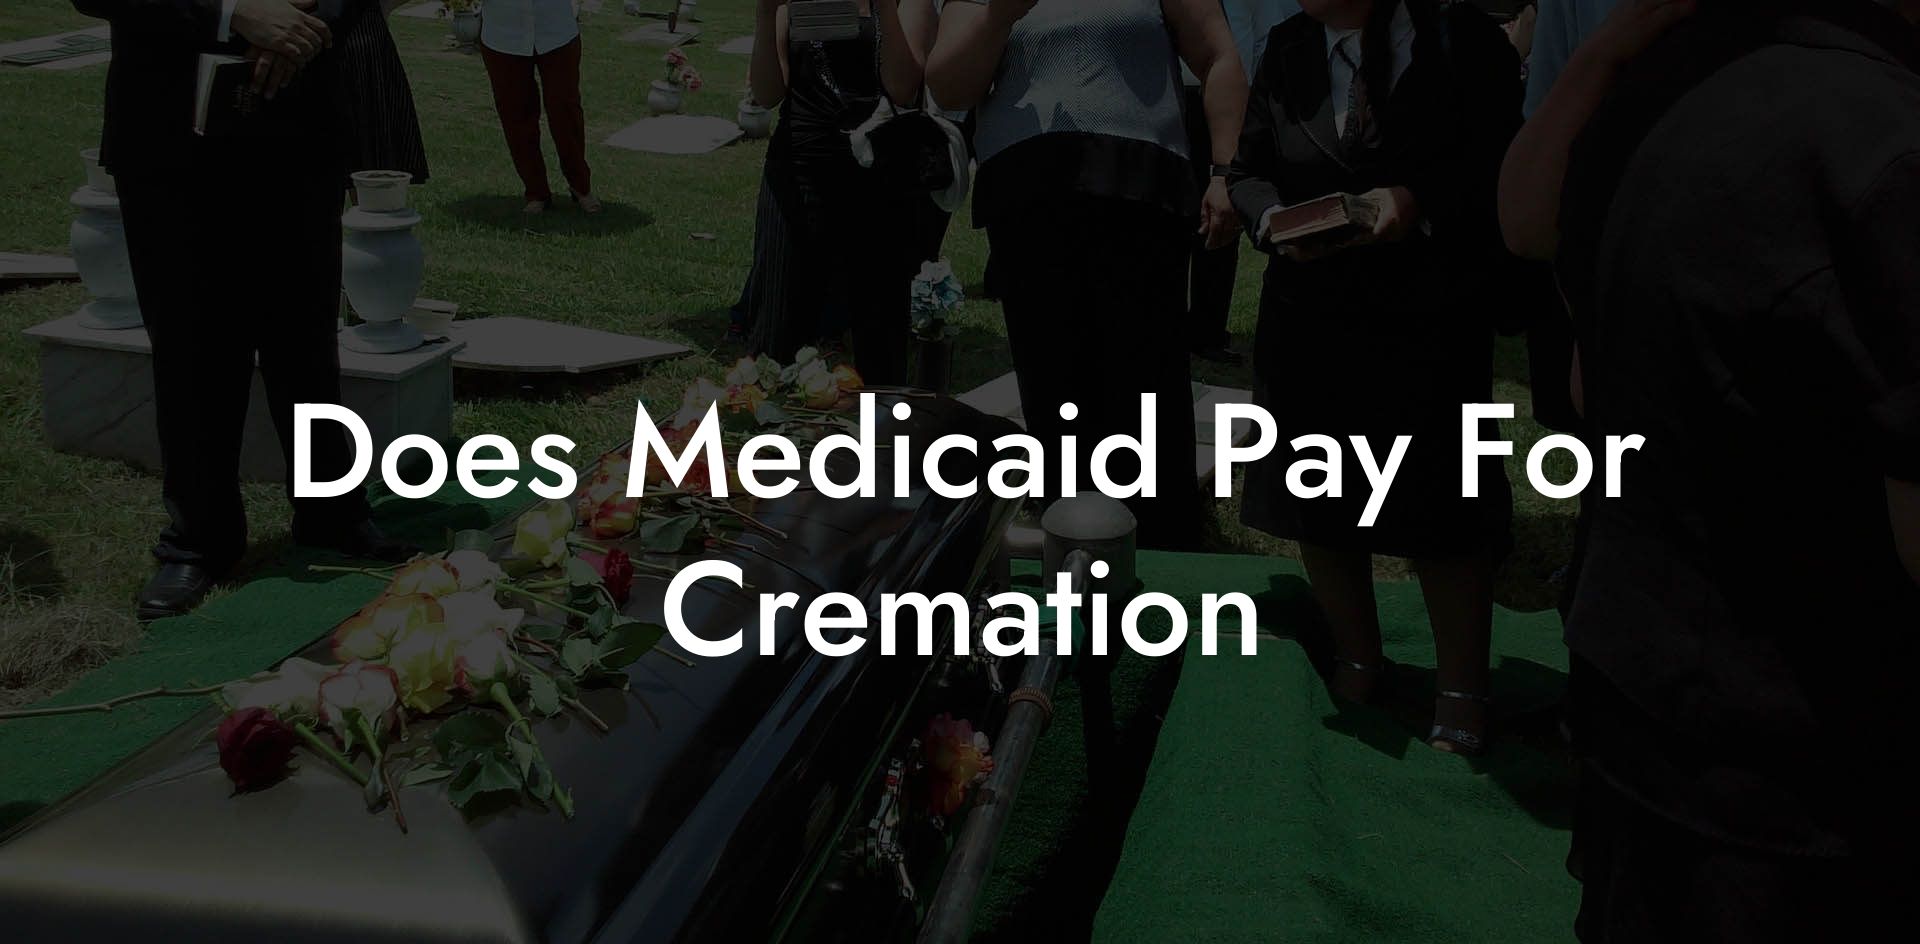 Does Medicaid Pay For Cremation